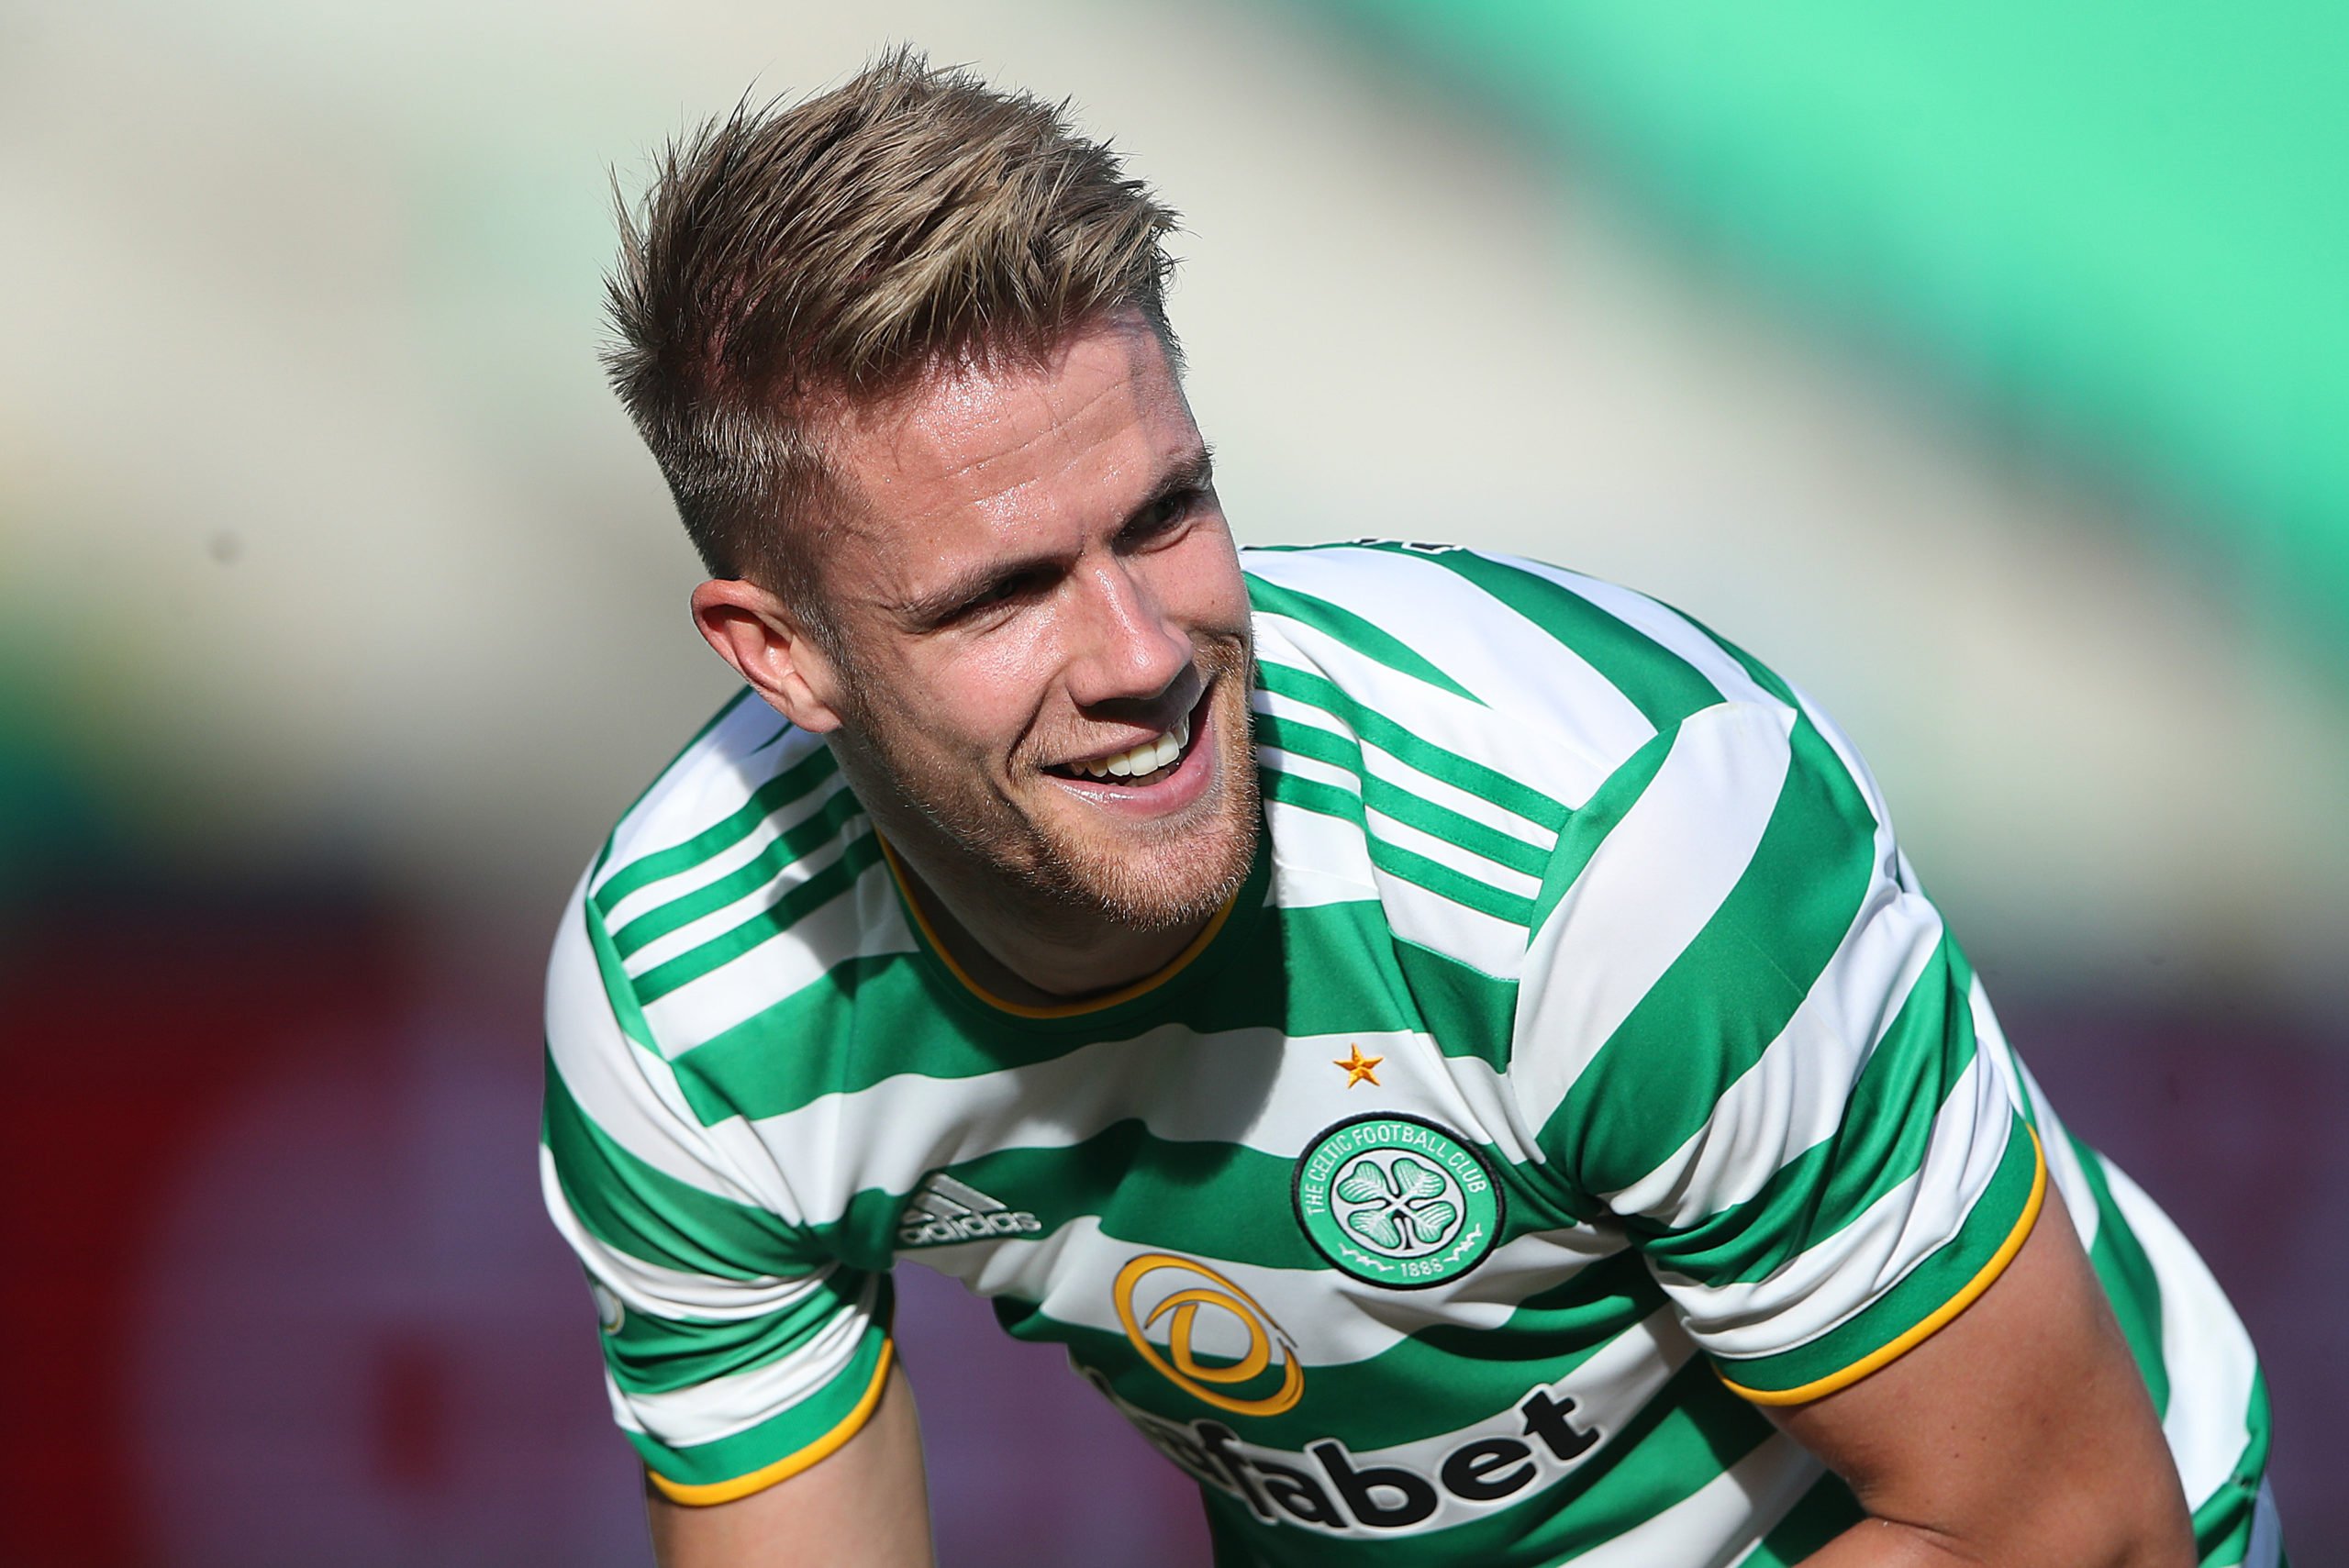 Neil Lennon will be delighted with AC Milan's latest move; Ajer looks like staying at Celtic